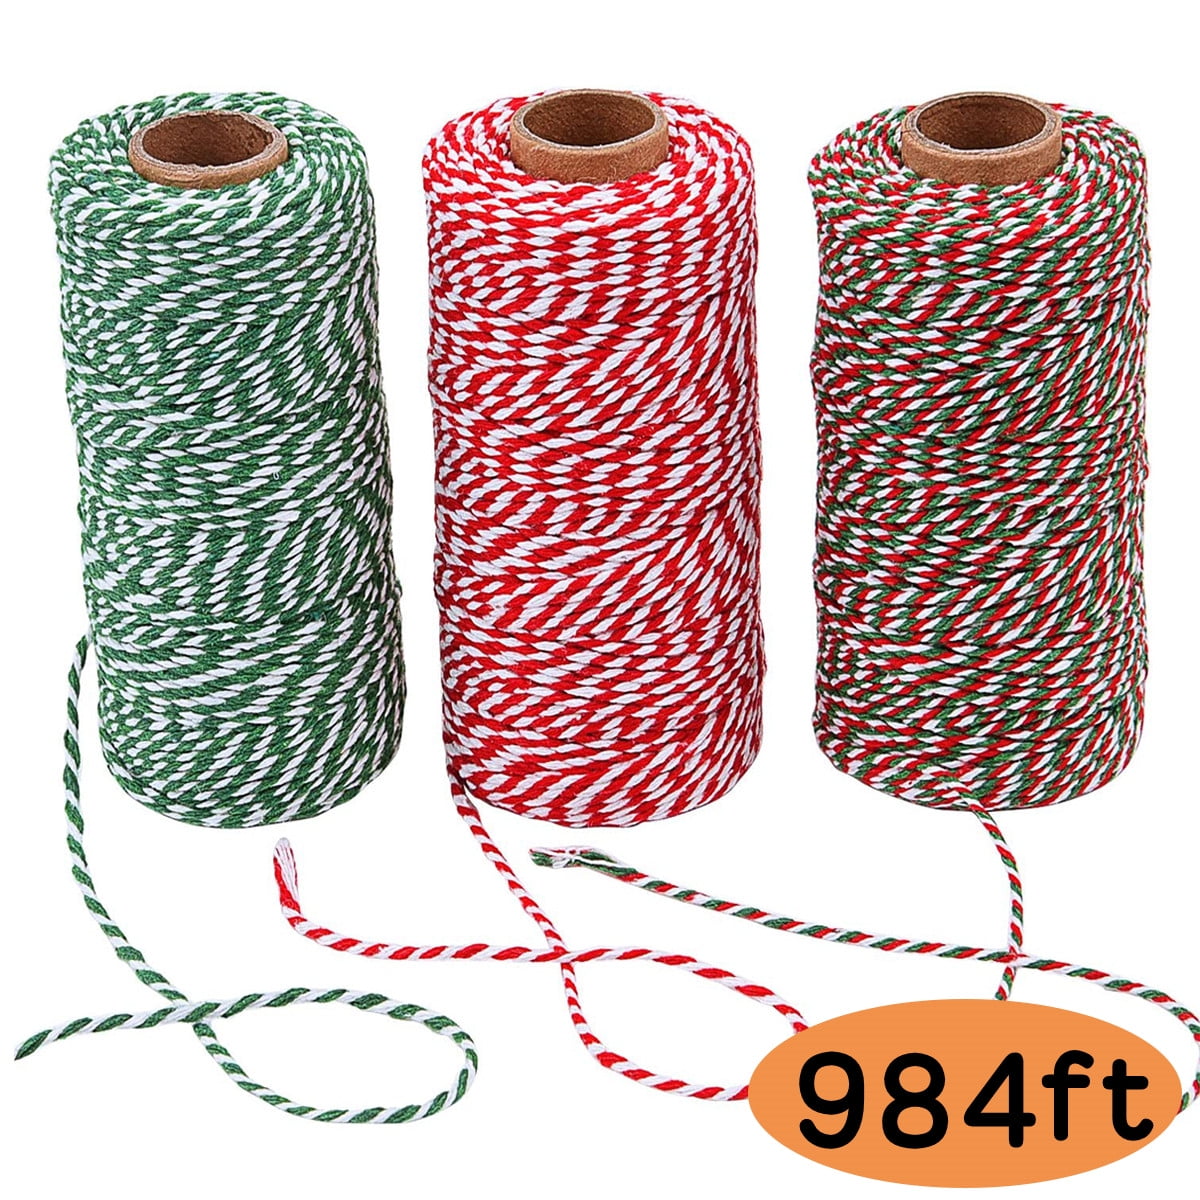 Incraftables 5mm Rope Cord (10 Colors). Best Cotton Macrame Cord (15ft per  Color). 3 Strands Twisted String Rope Cord for Wall Hanging, Plant Hangers,  Crafts, Gift Wrapping & Wedding Decorations